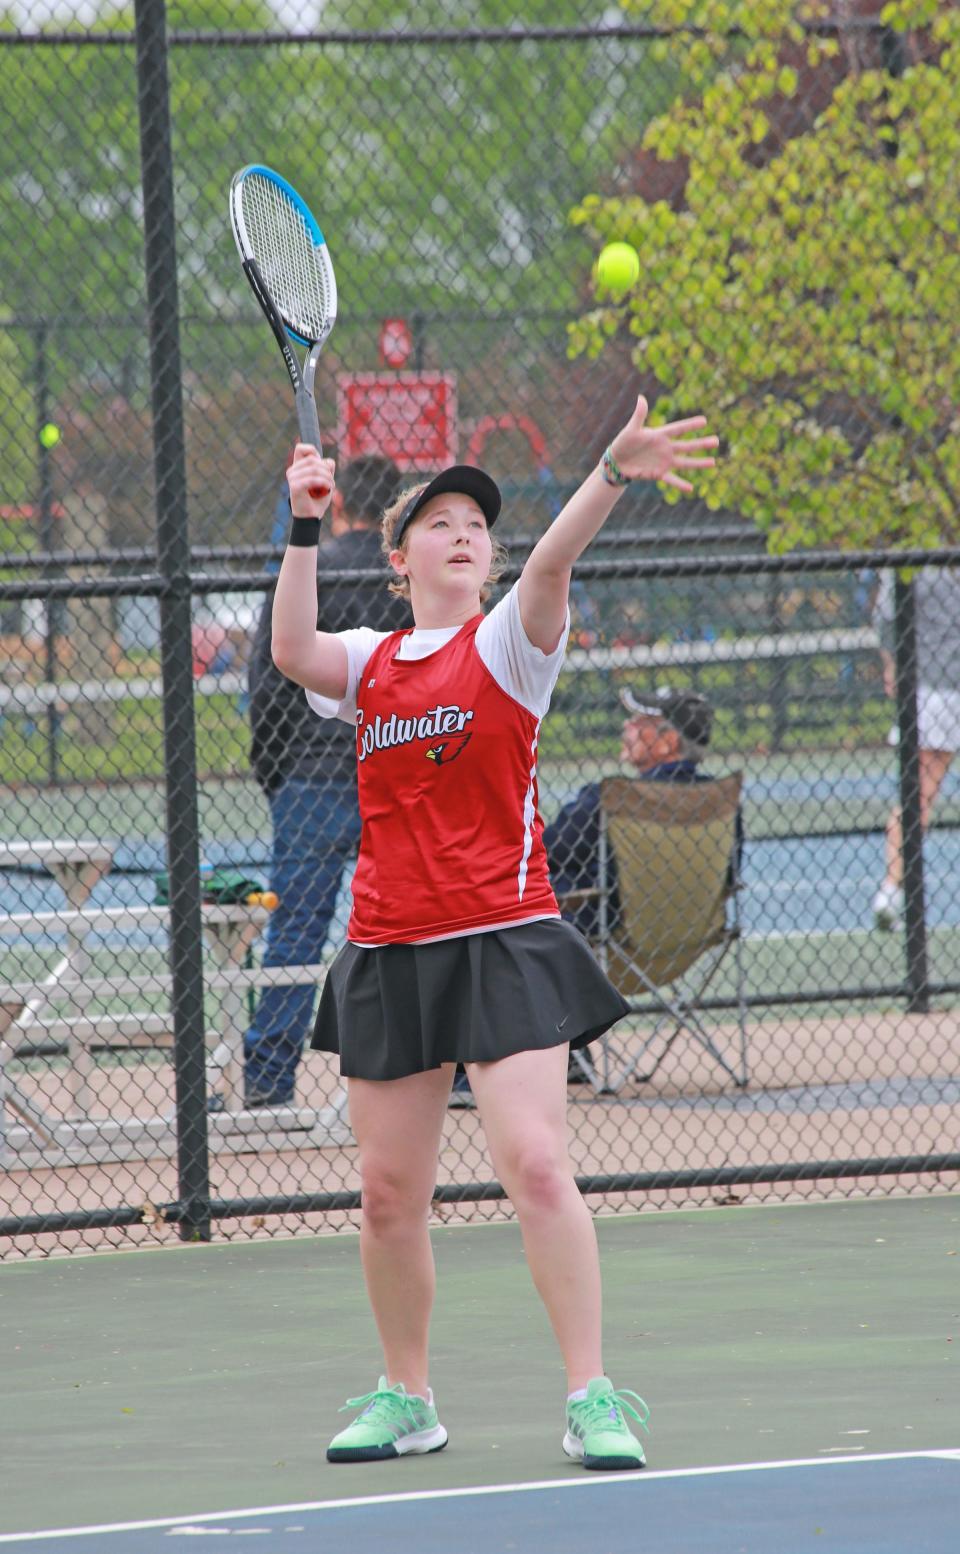 Janet Rucker, shown here in early season action, won the Interstate 8 No. 4 singles conference championship Monday